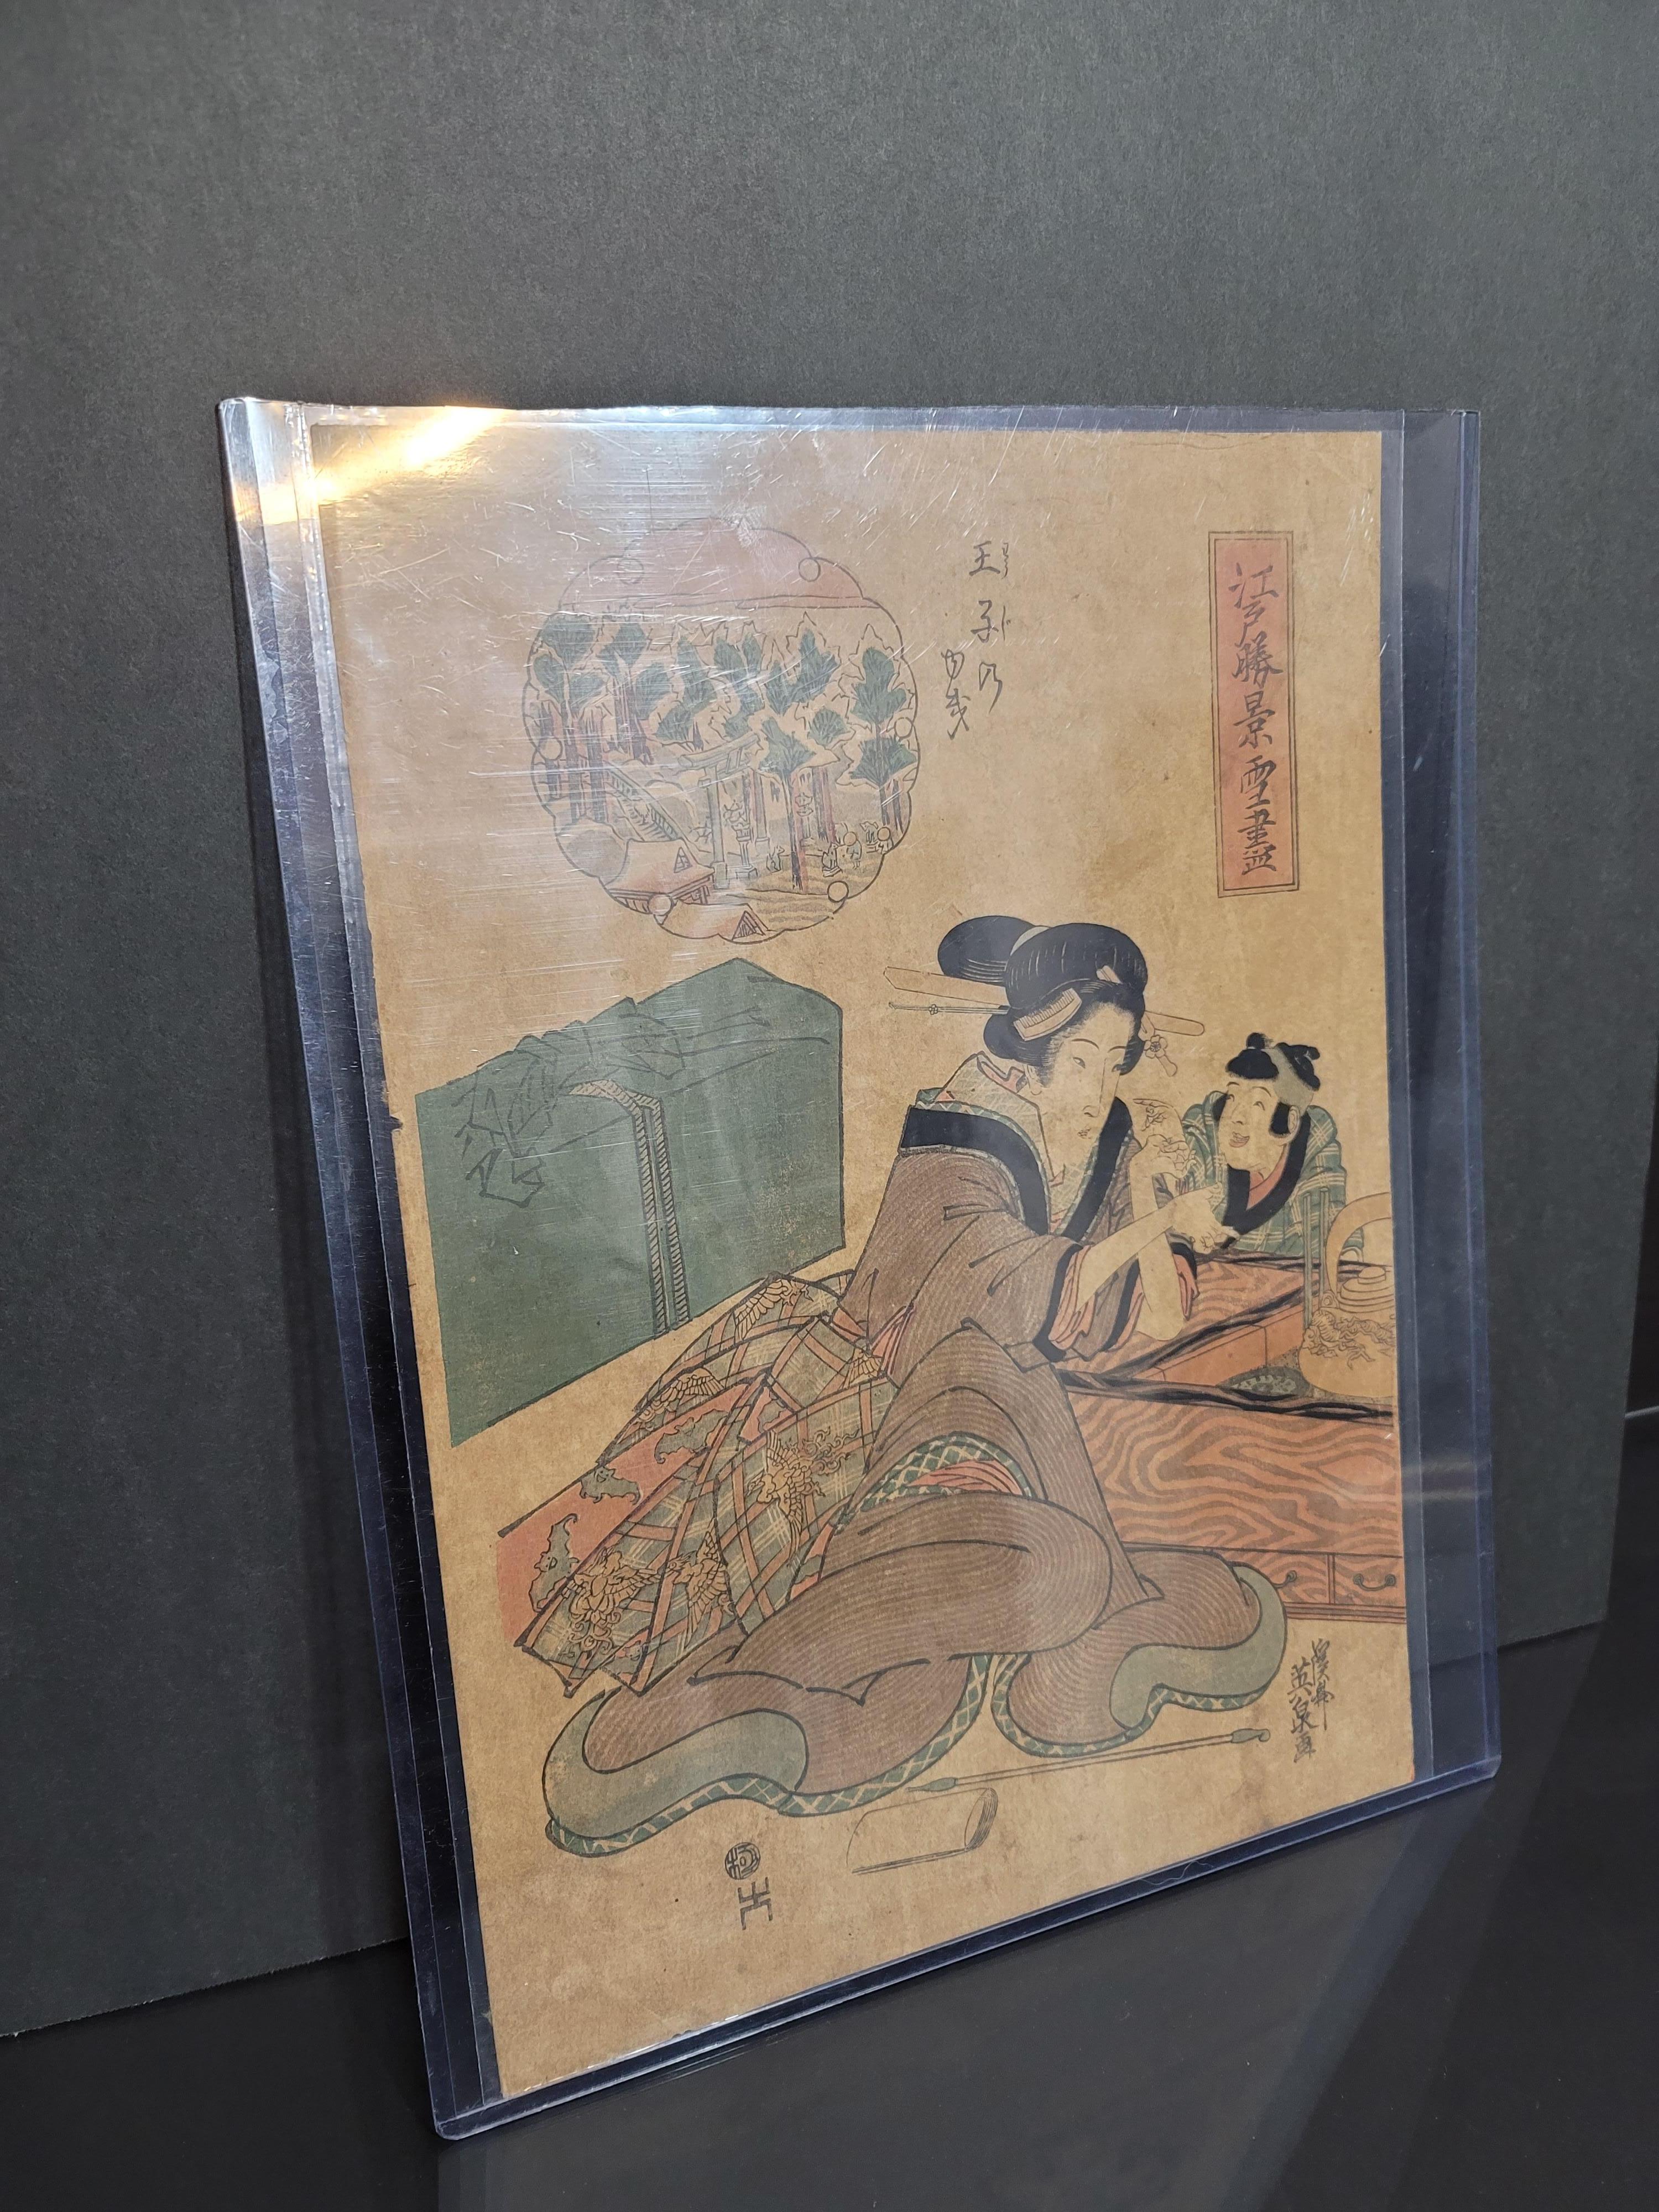 Japanese Woodblock Print by Keisai Eisen 渓斎 英泉 For Sale 6